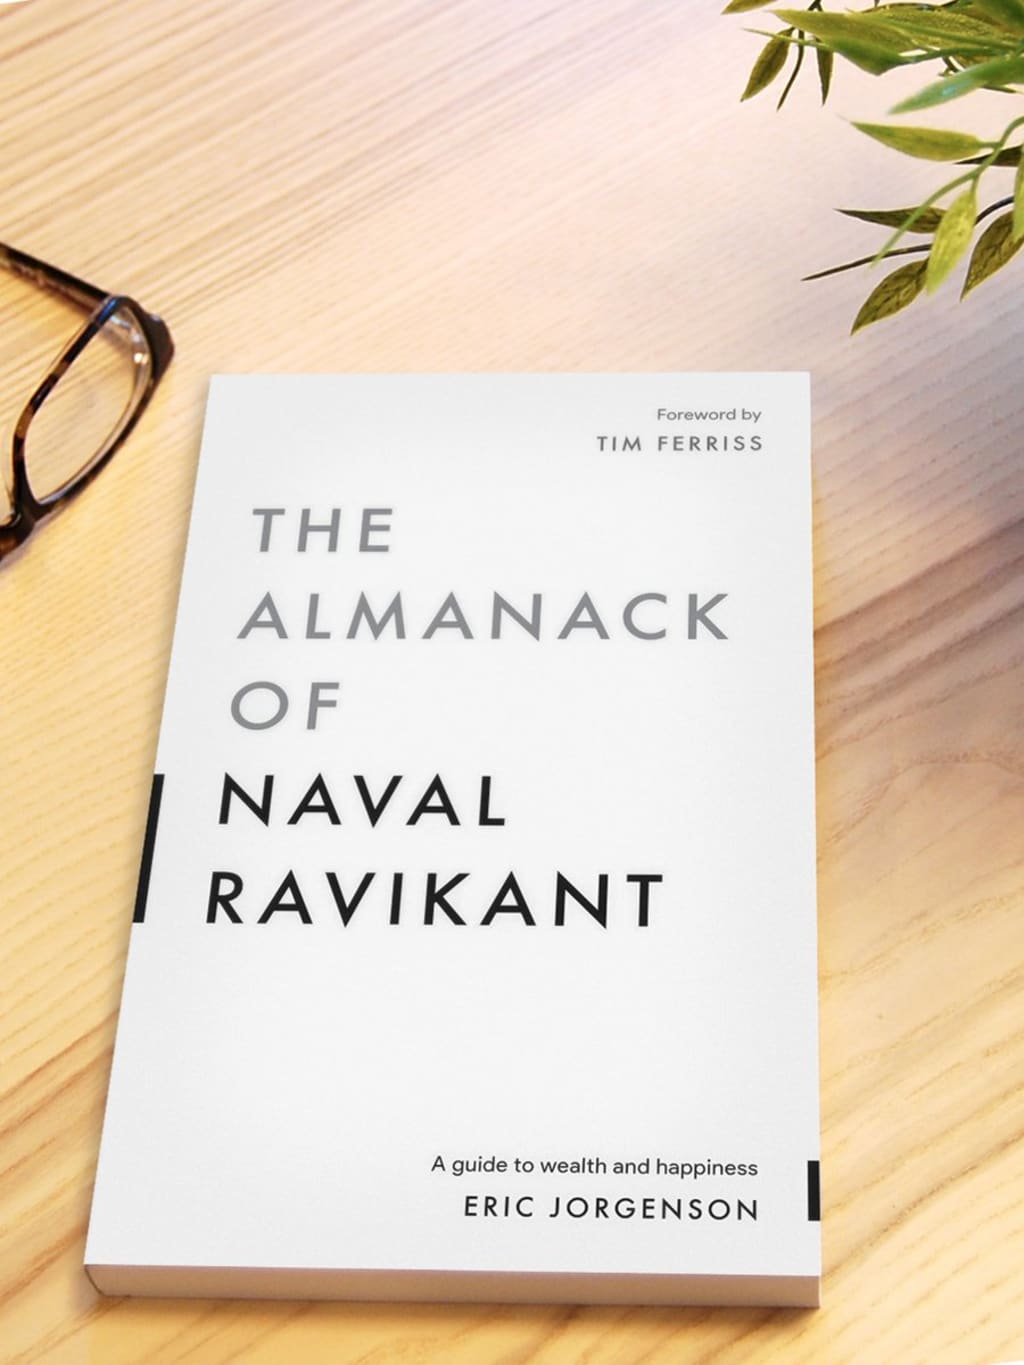 My One Book Recommendation: The Almanack of Naval Ravikant